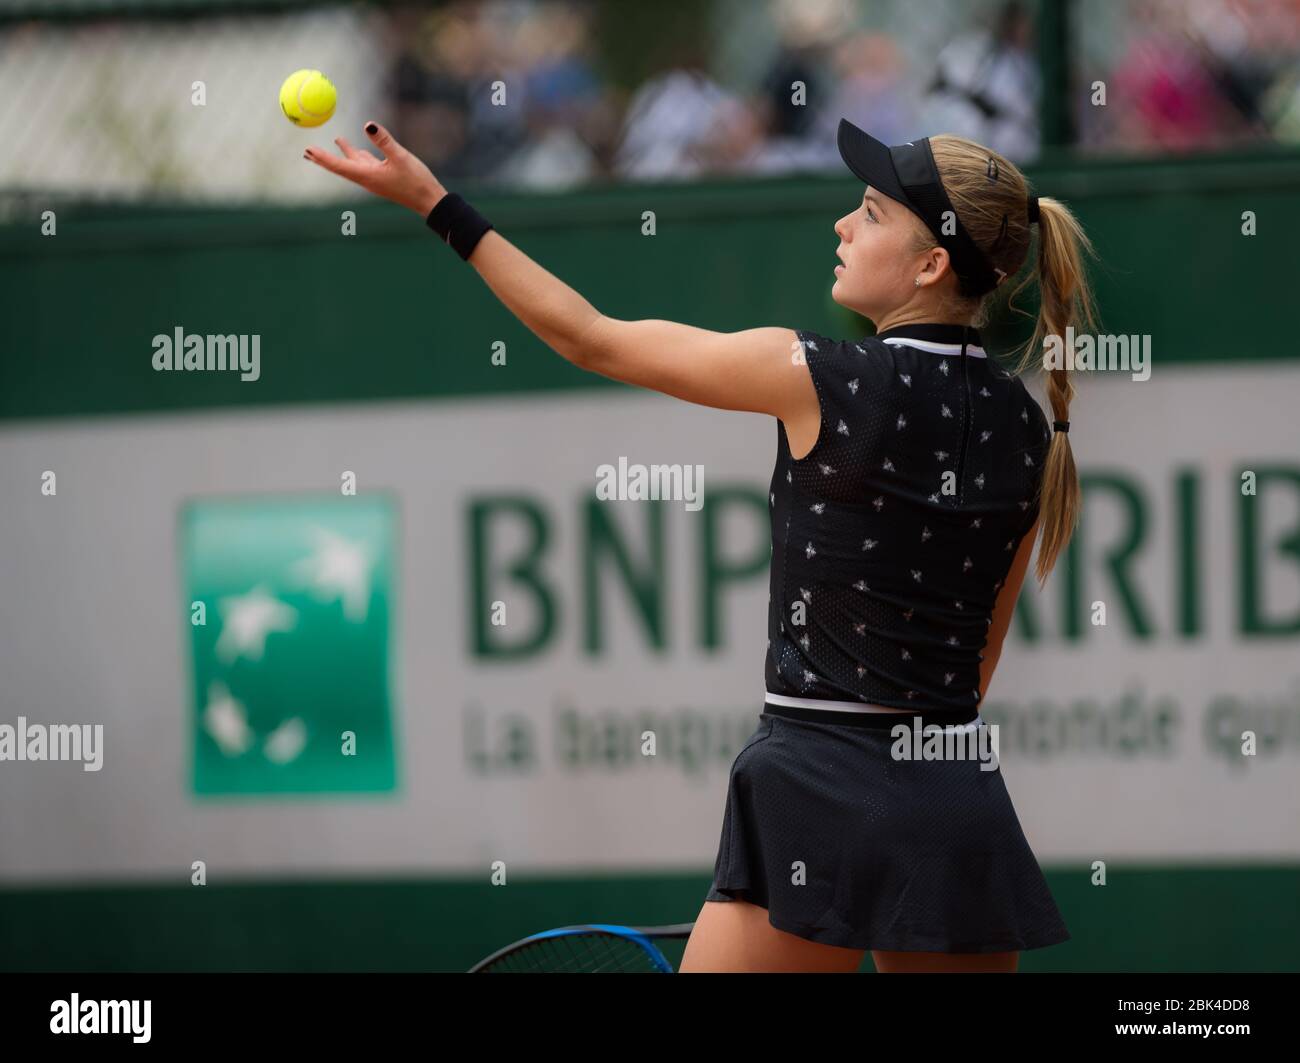 Katie Swan of Great Britain in action during the second qualifications round at the 2019 Roland Garros Grand Slam tennis tournament Stock Photo